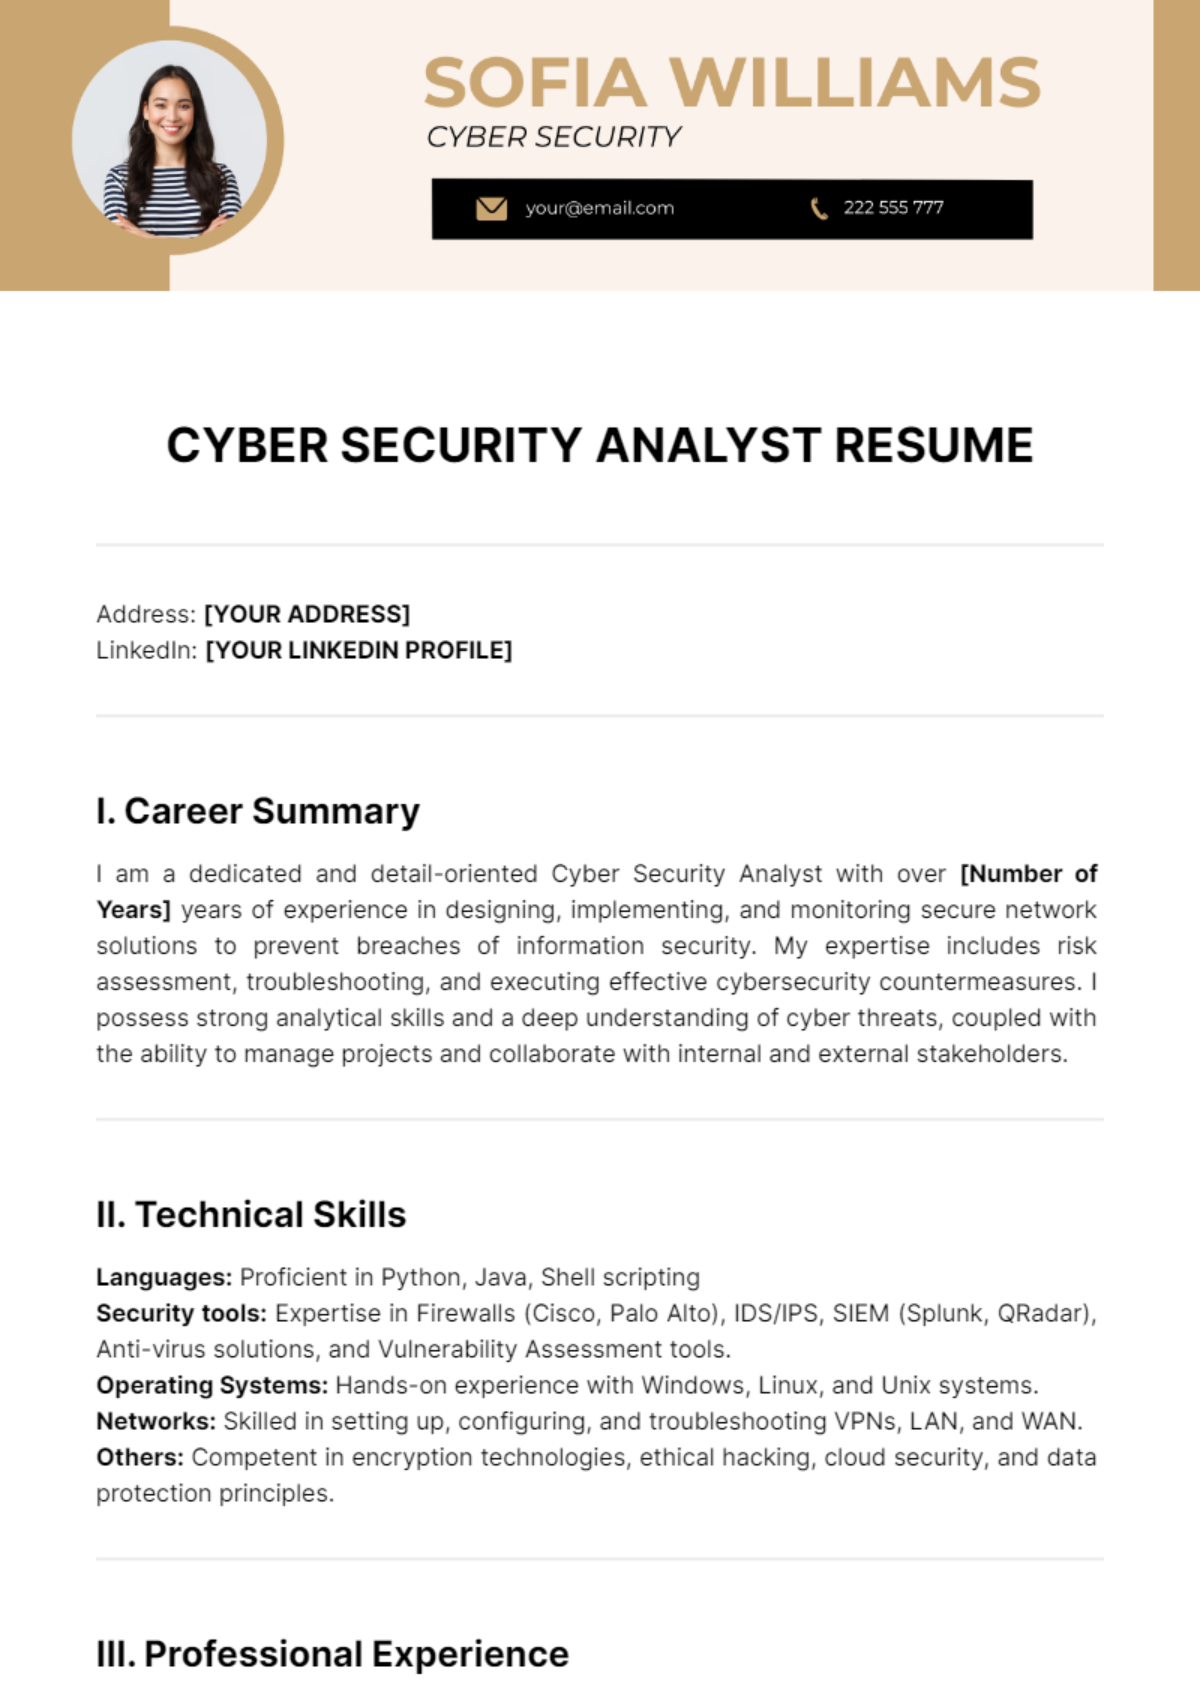 Cyber Security Analyst Resume Template